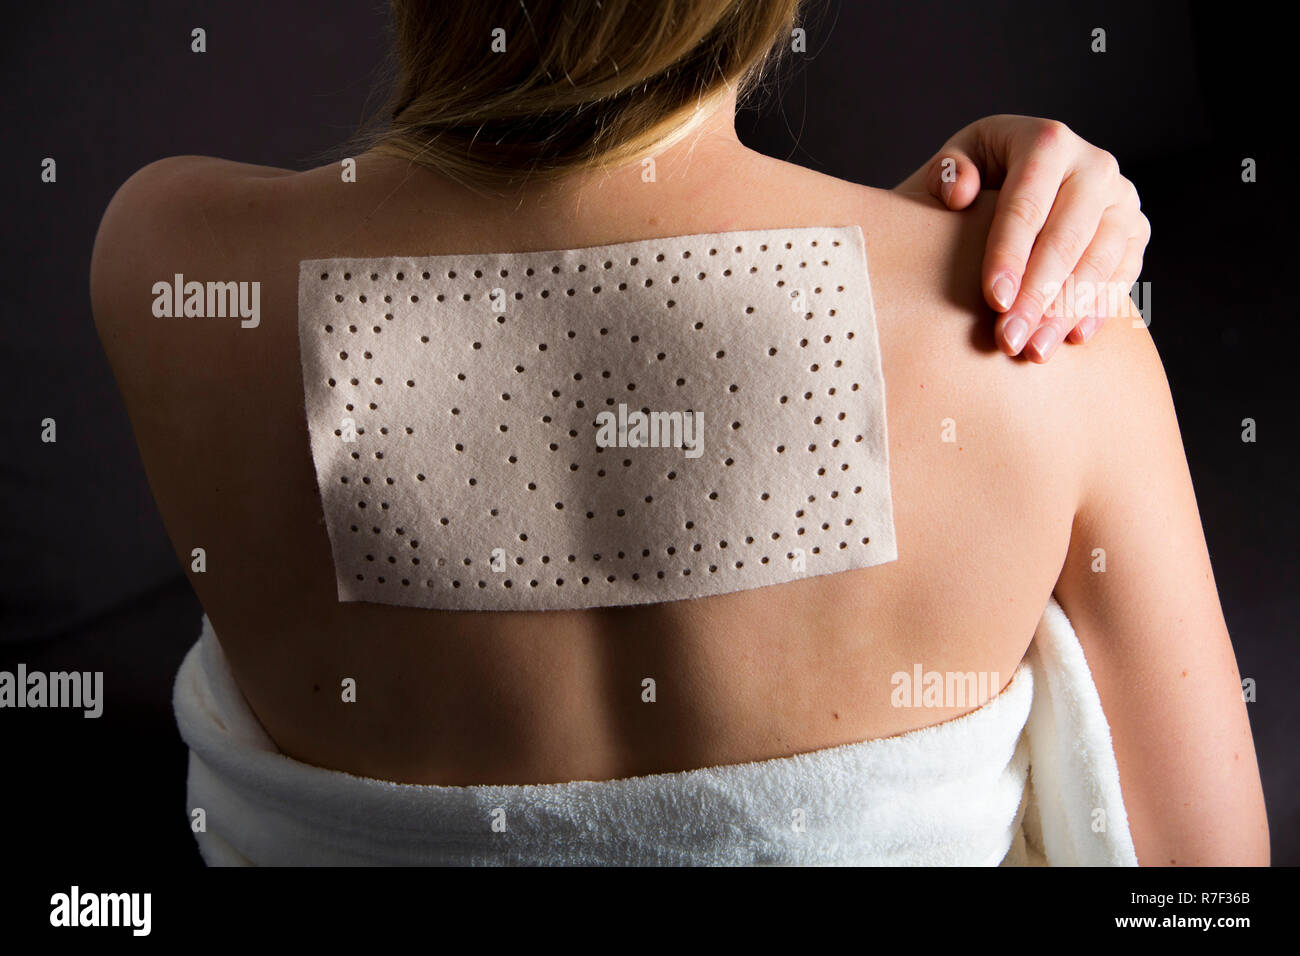 Young woman suffering from back pain has applied a heat plaster Stock Photo